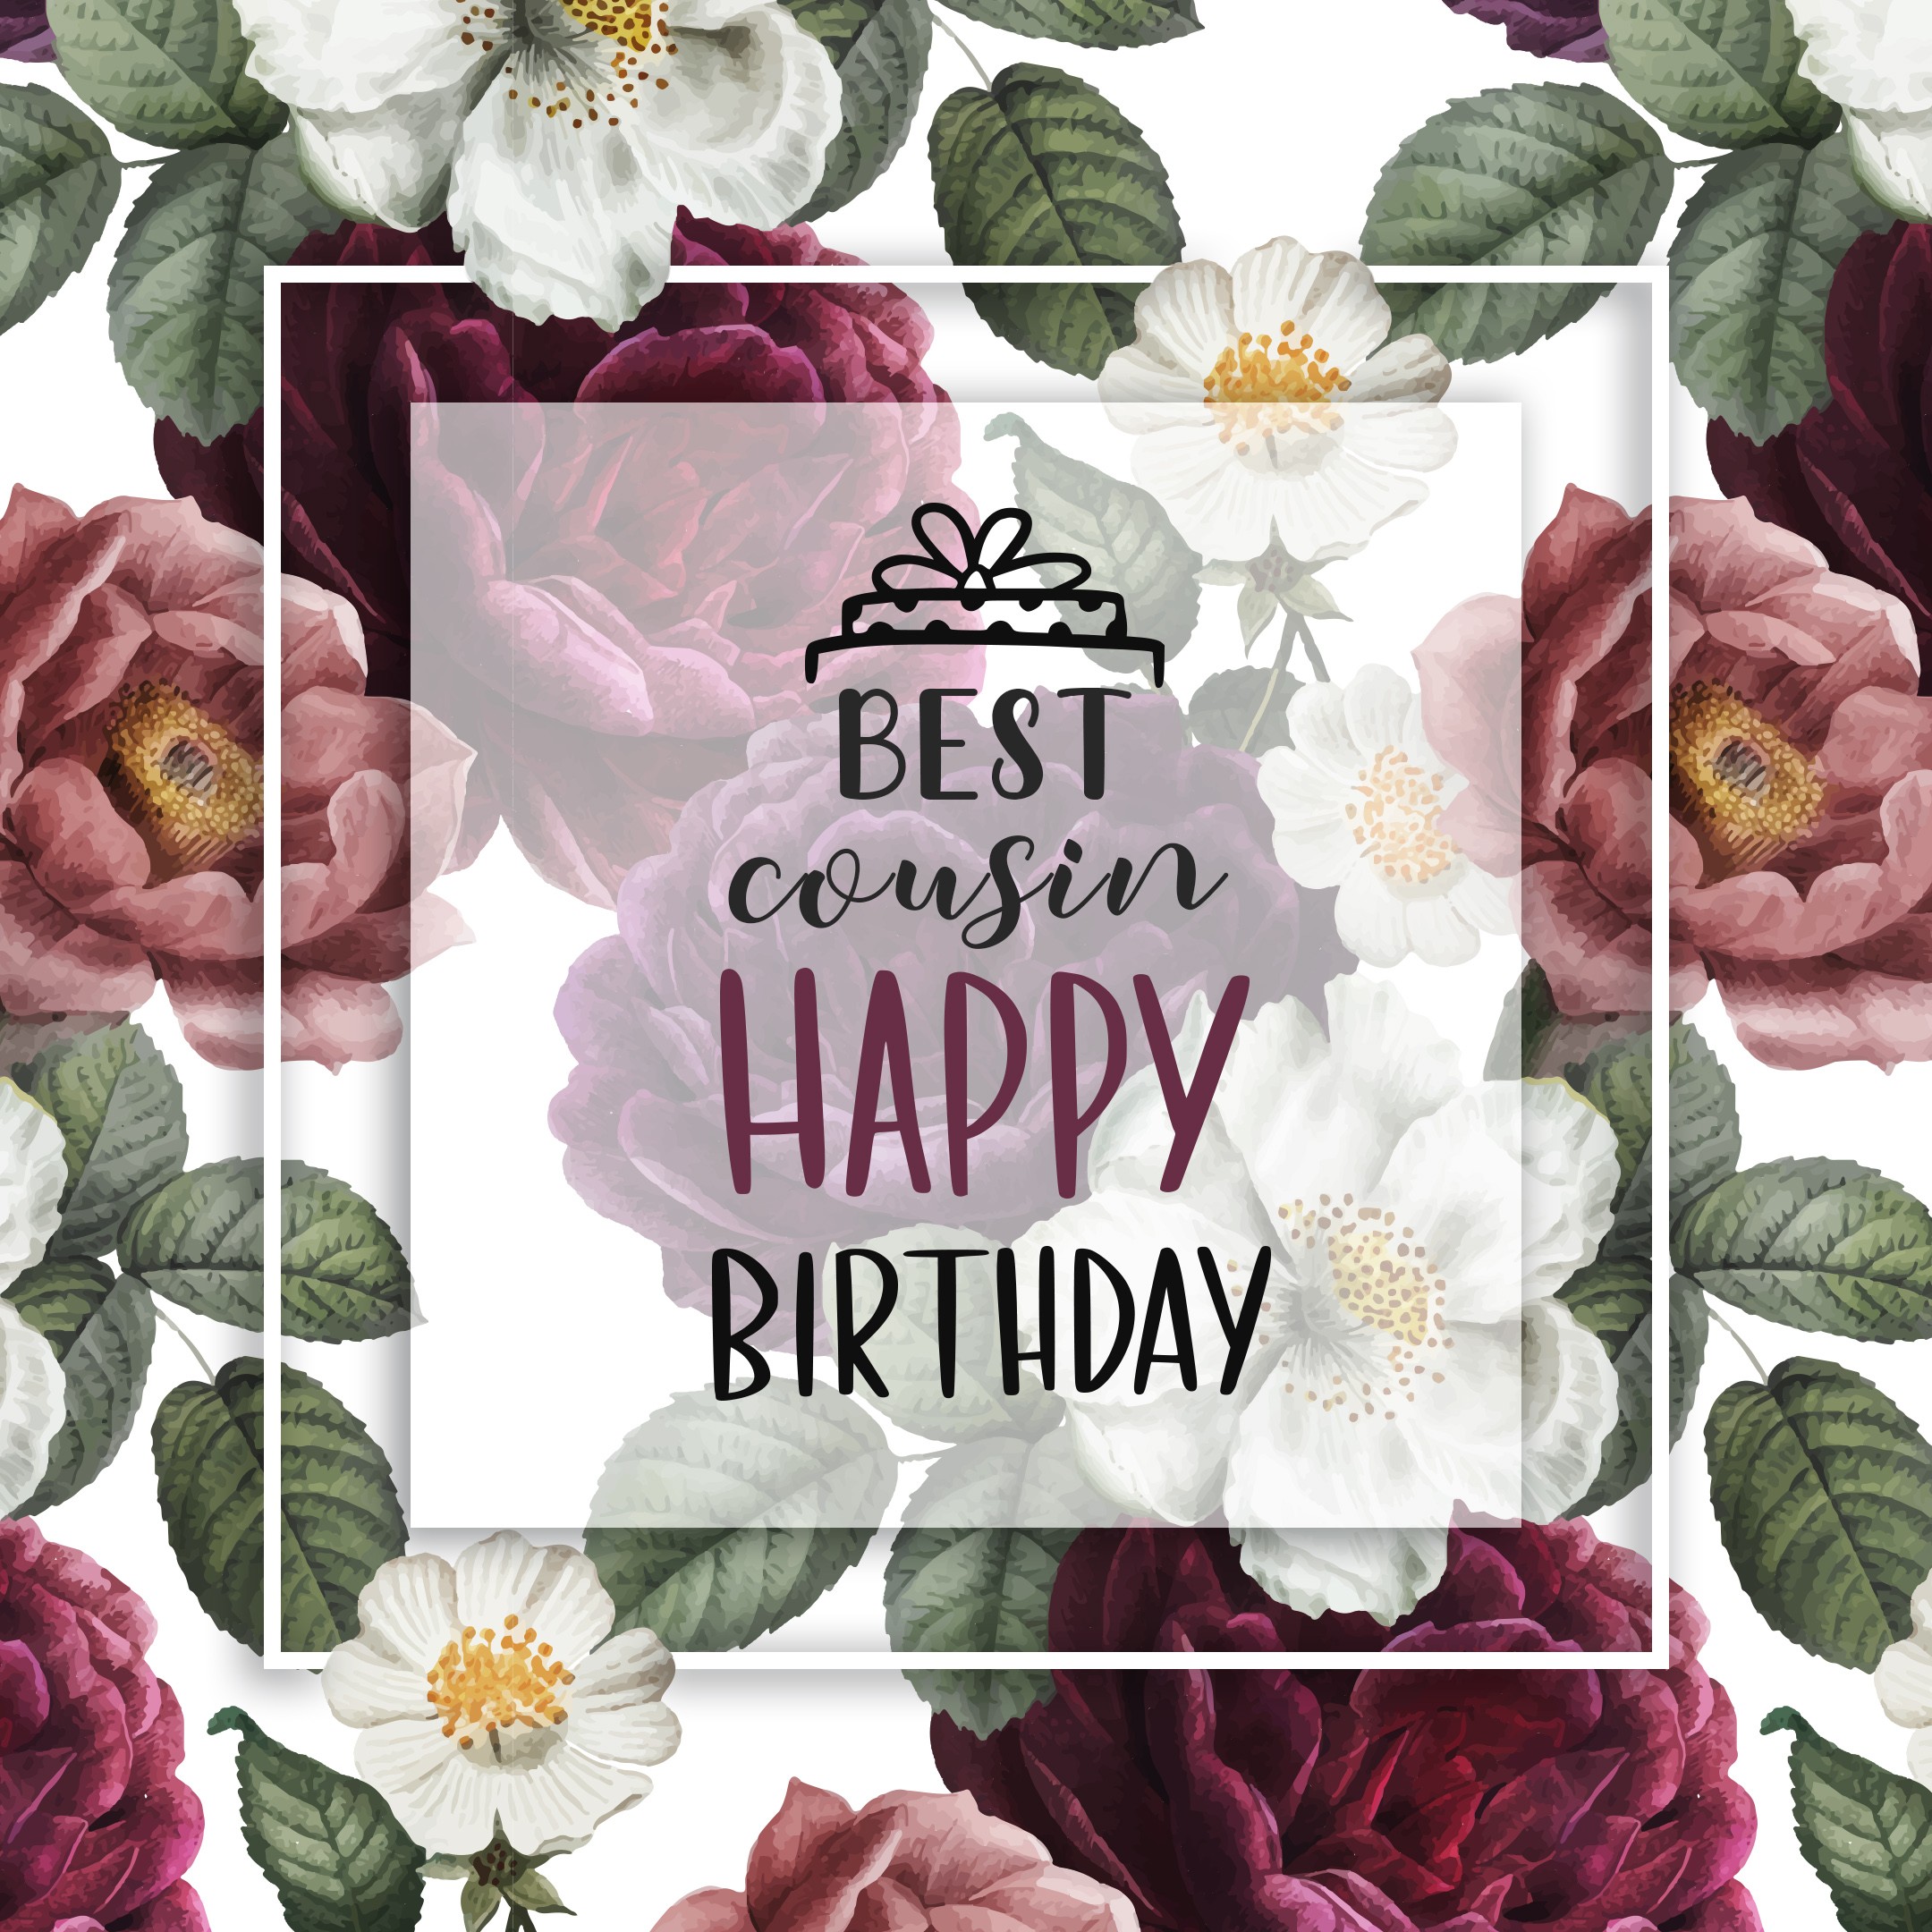 Free Happy Birthday Image For Cousin With Flowers Birthdayimg